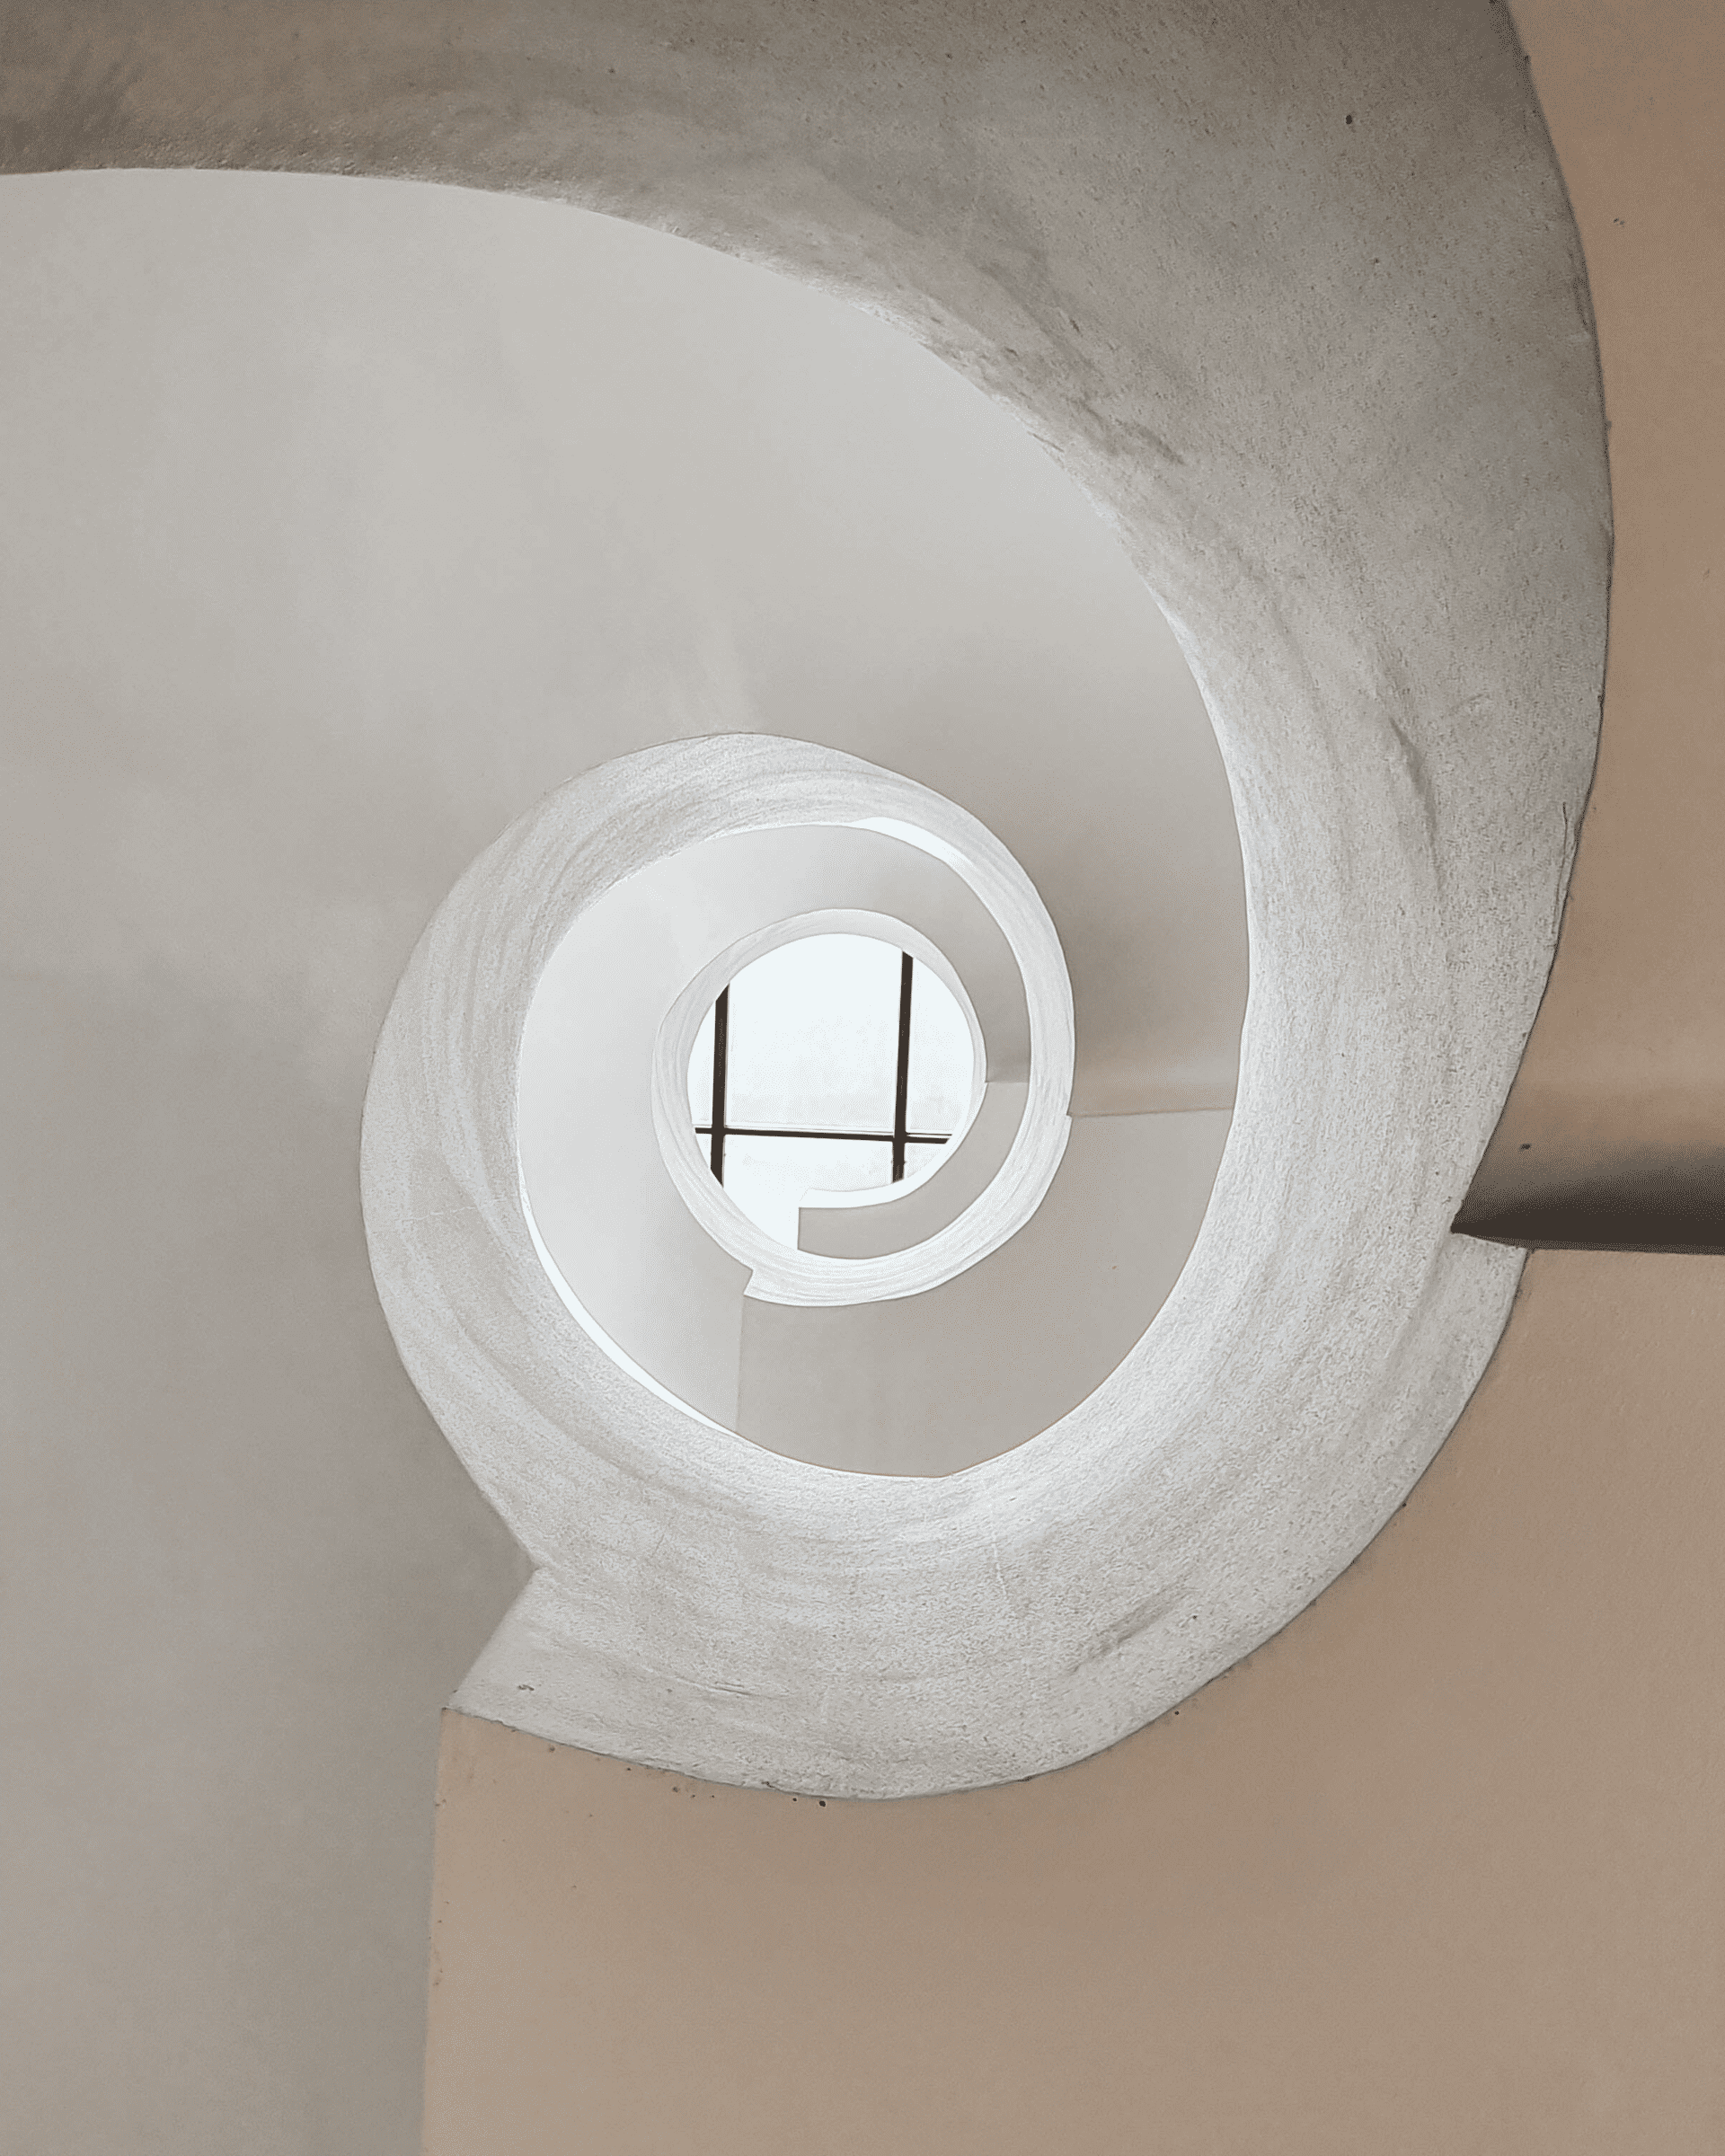 looking up in the middle of a spiral staircase